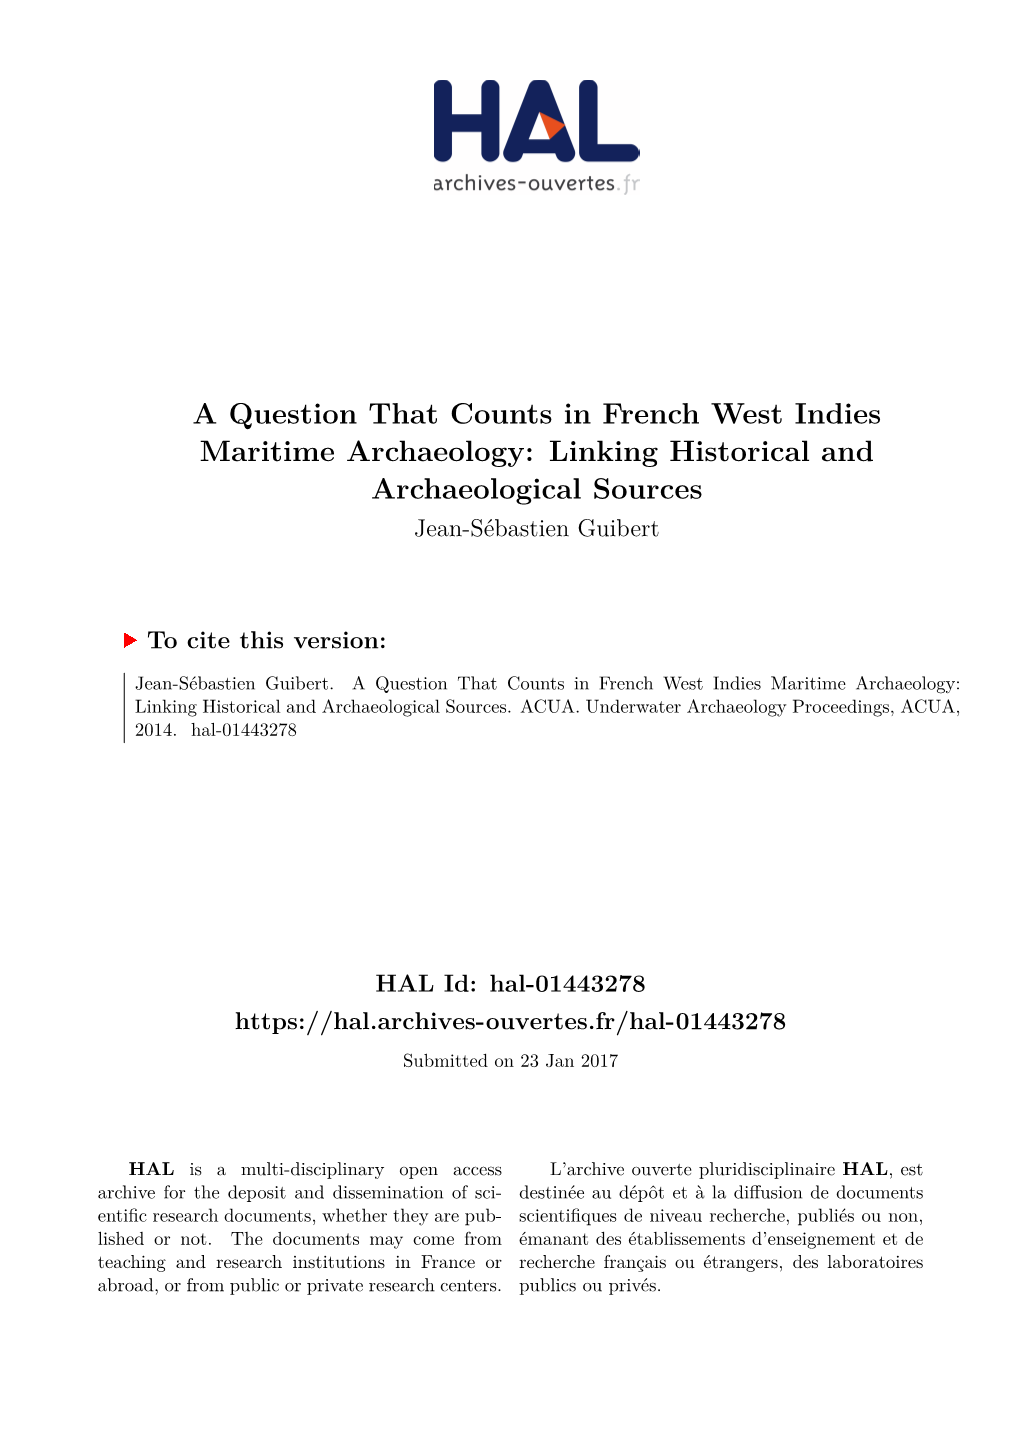 A Question That Counts in French West Indies Maritime Archaeology: Linking Historical and Archaeological Sources Jean-Sébastien Guibert